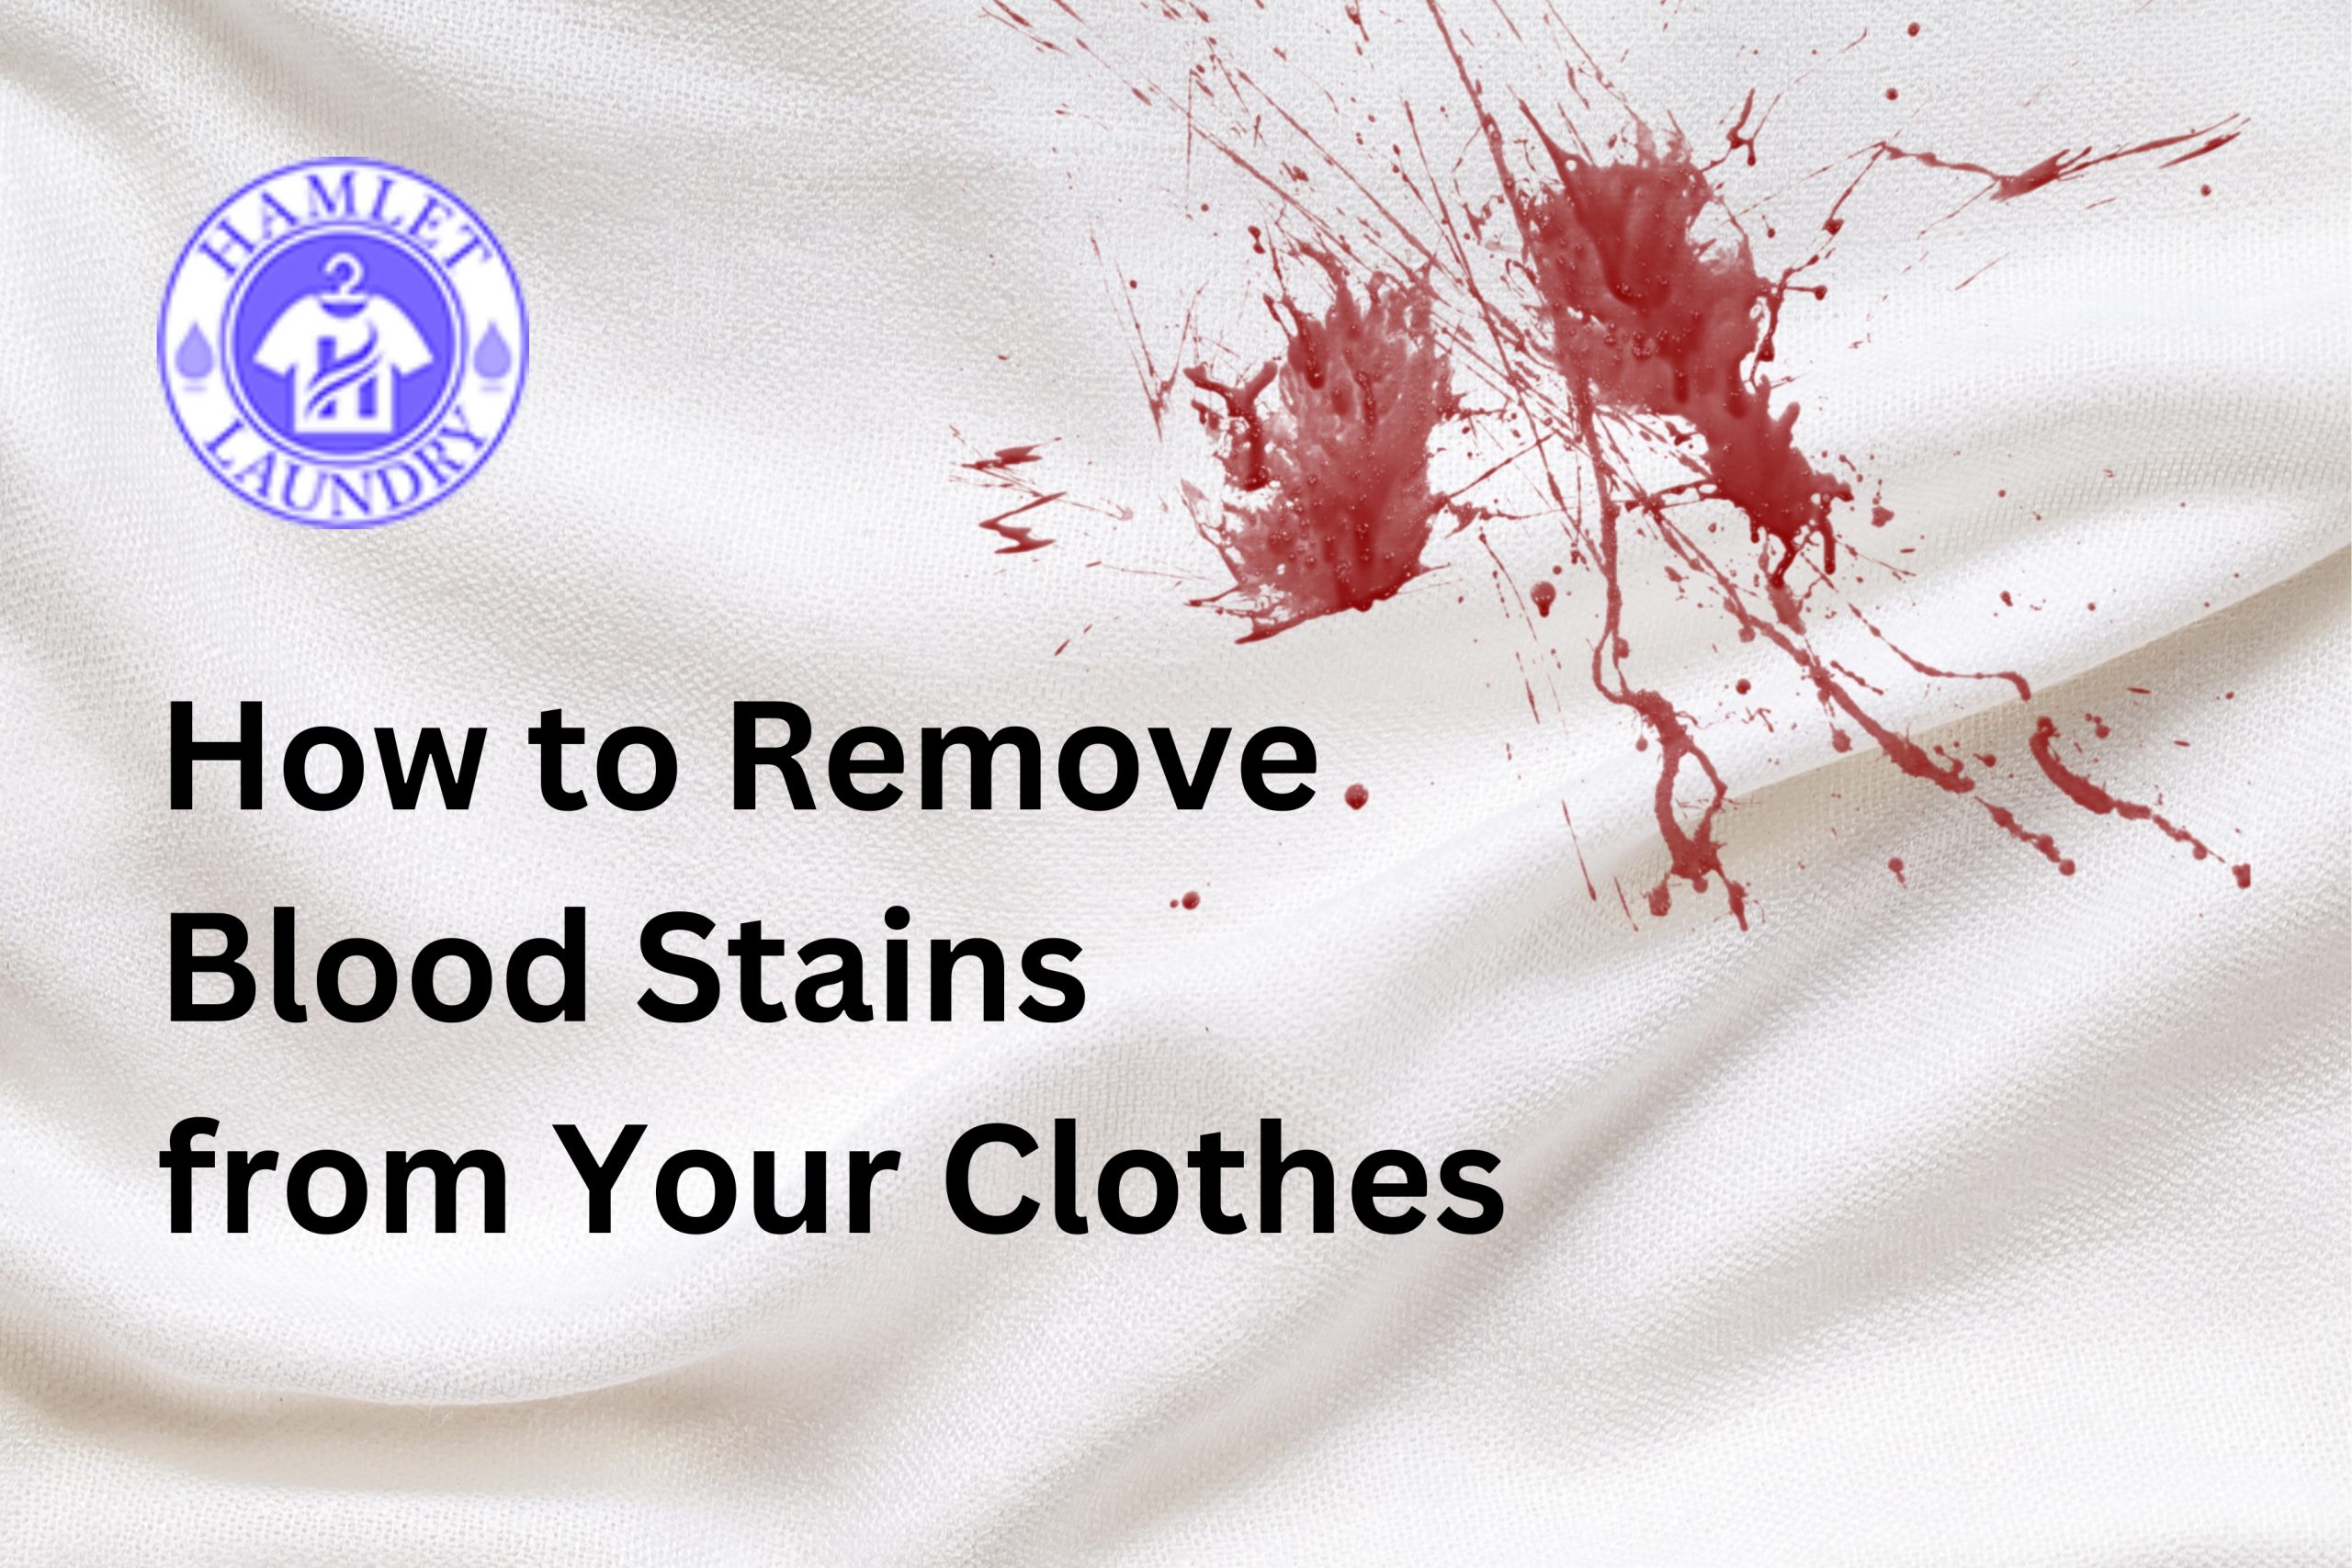 How To Remove Blood Stains From Your Clothes